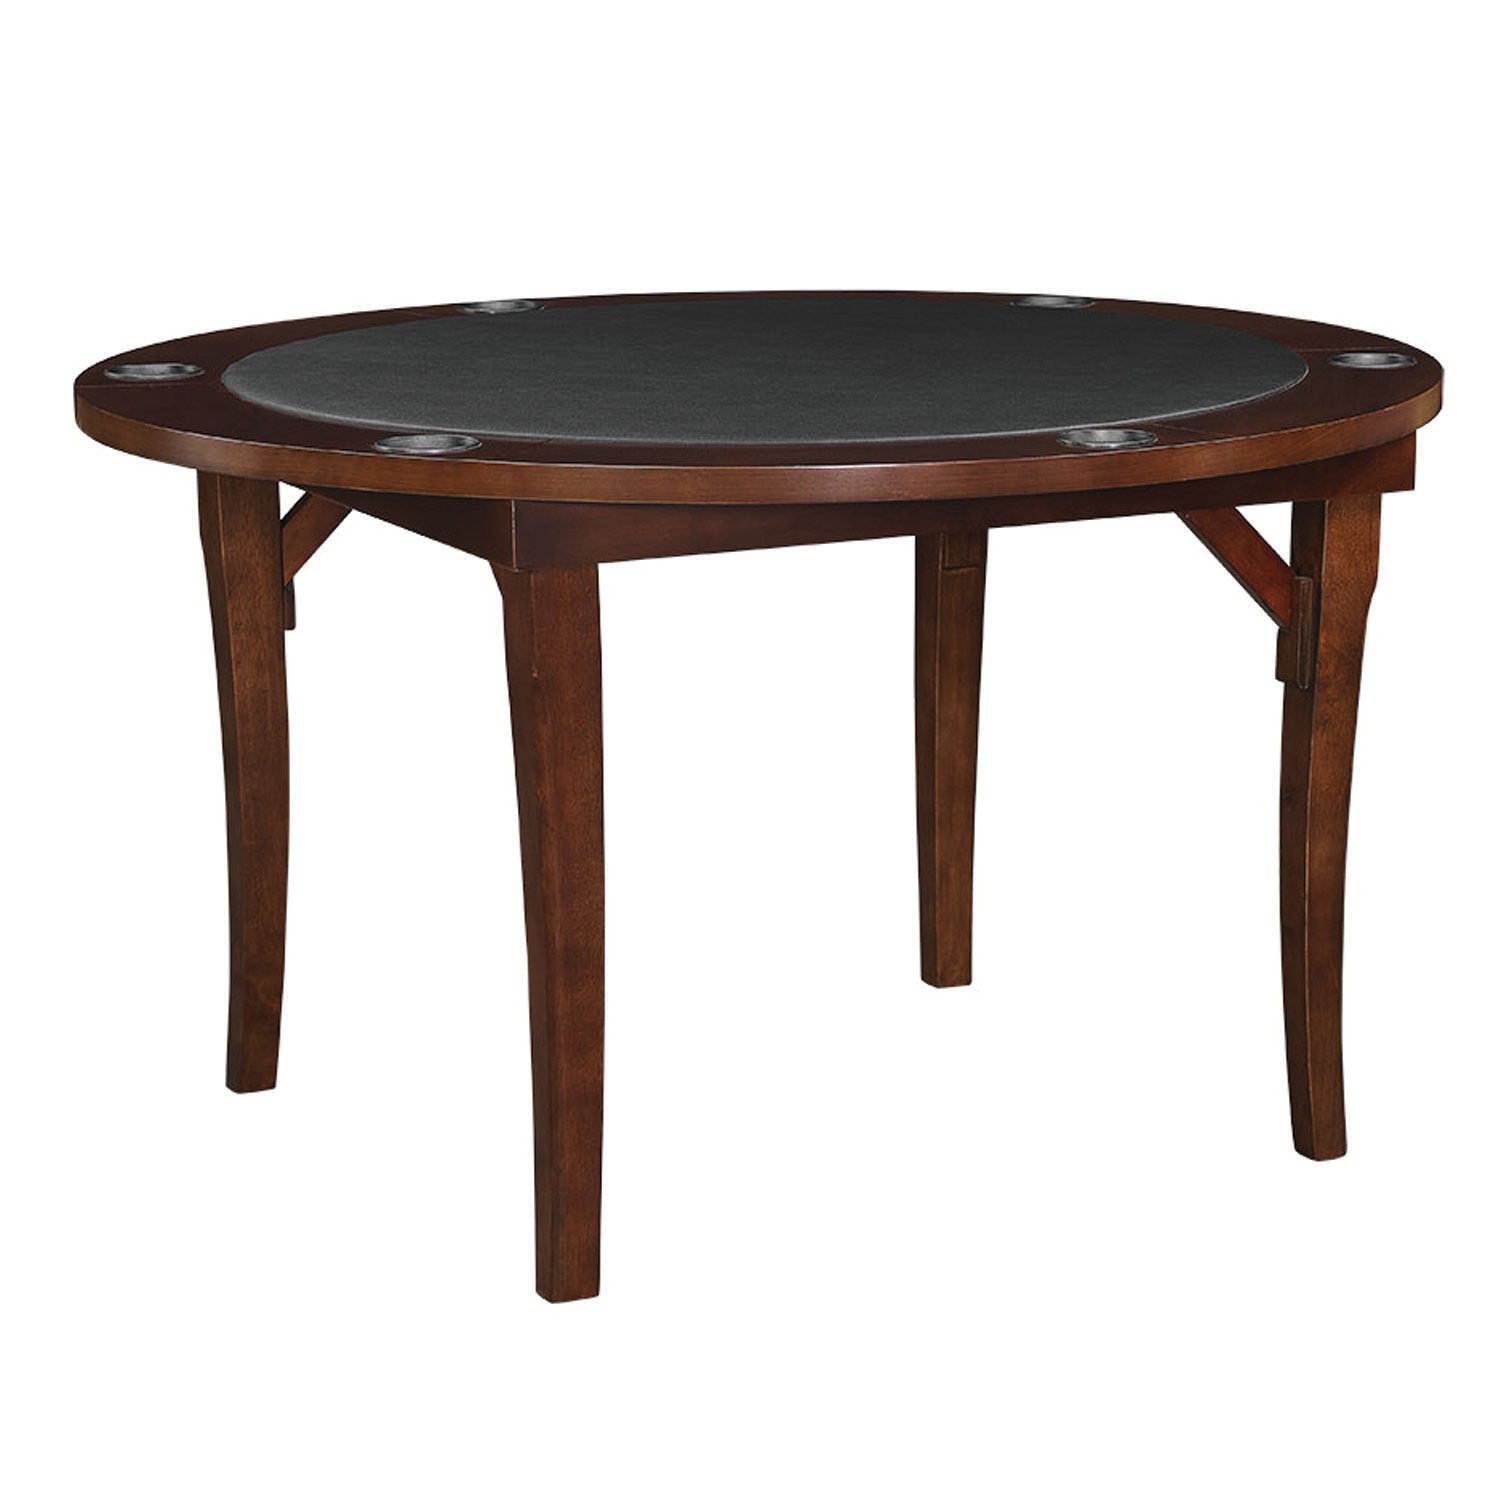 48" GAME TABLE - CAPPUCCINO